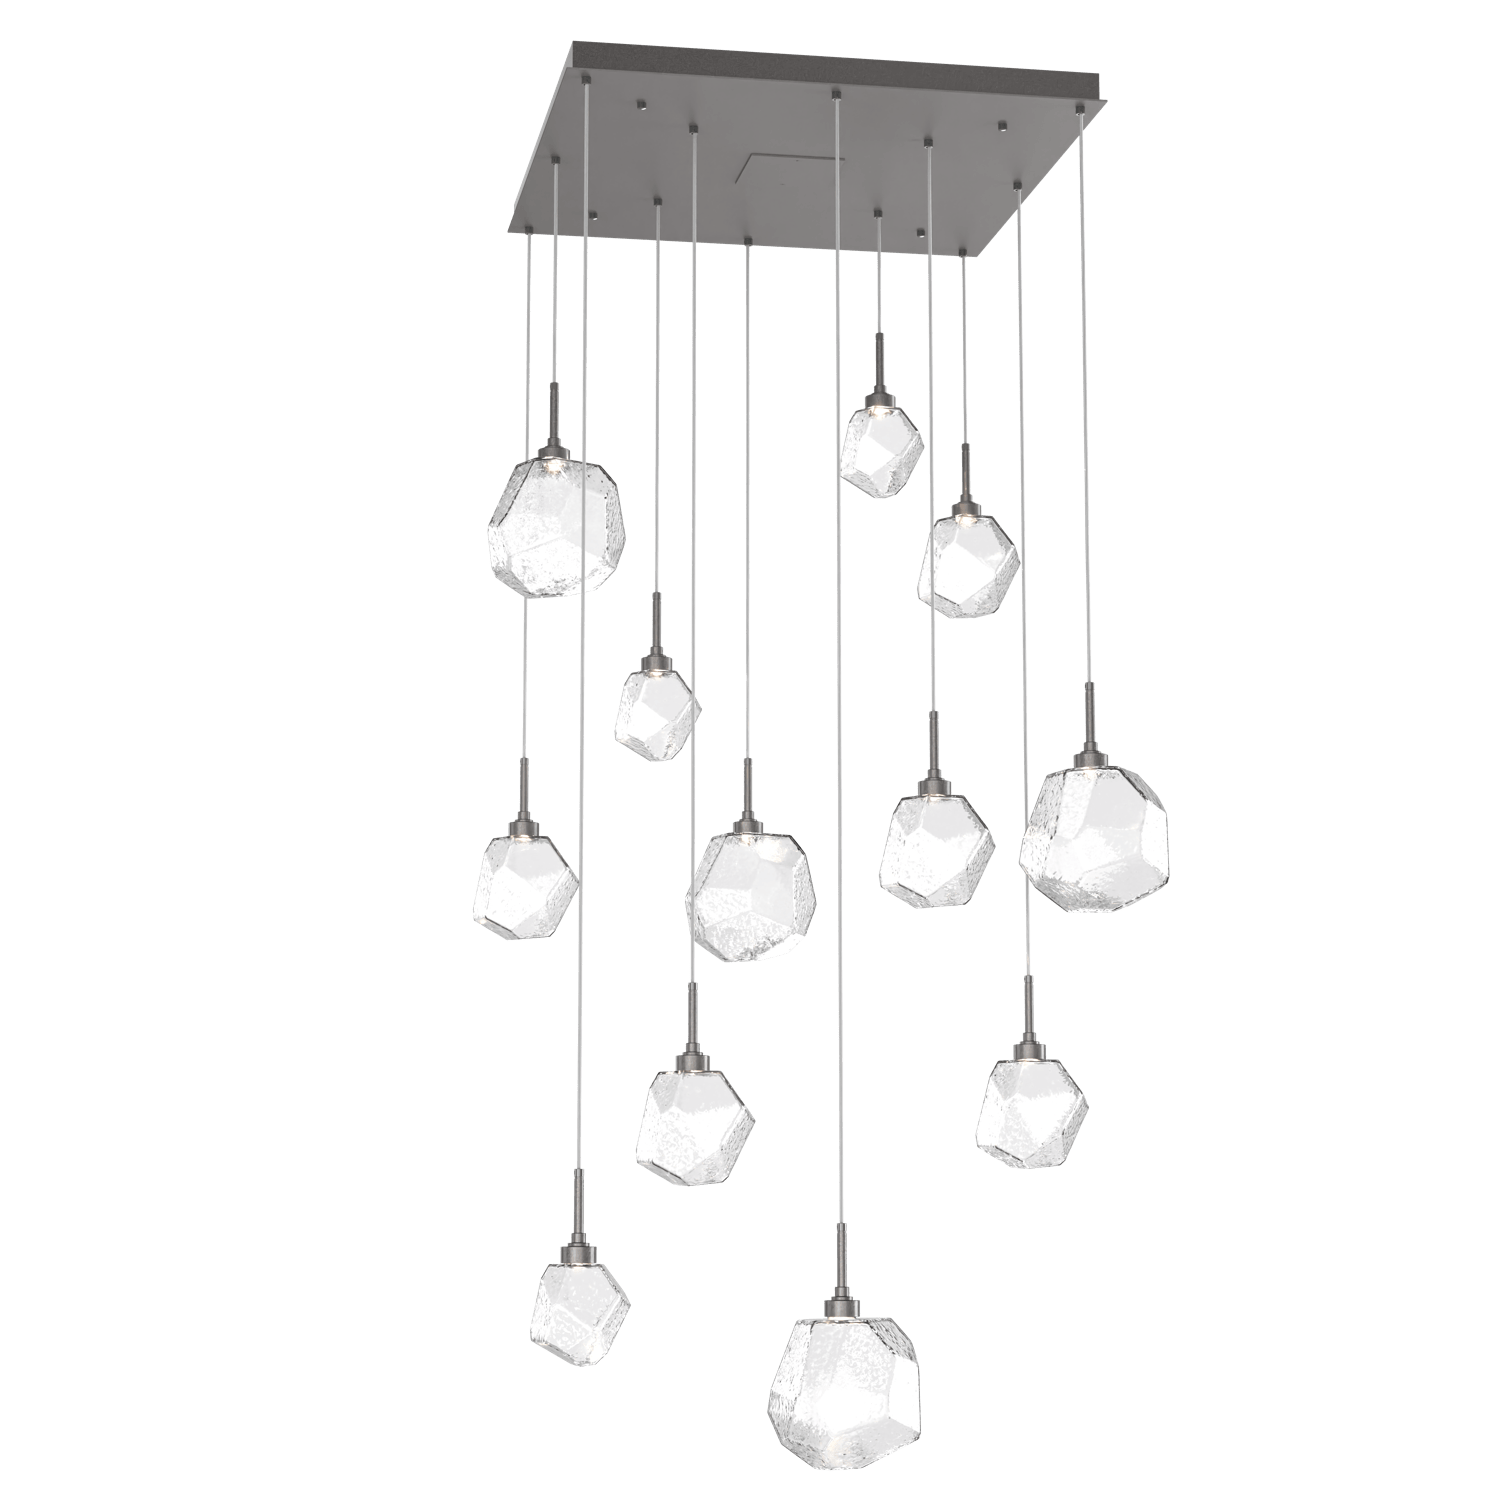 CHB0039-12-GP-C-Hammerton-Studio-Gem-12-light-square-pendant-chandelier-with-graphite-finish-and-clear-blown-glass-shades-and-LED-lamping